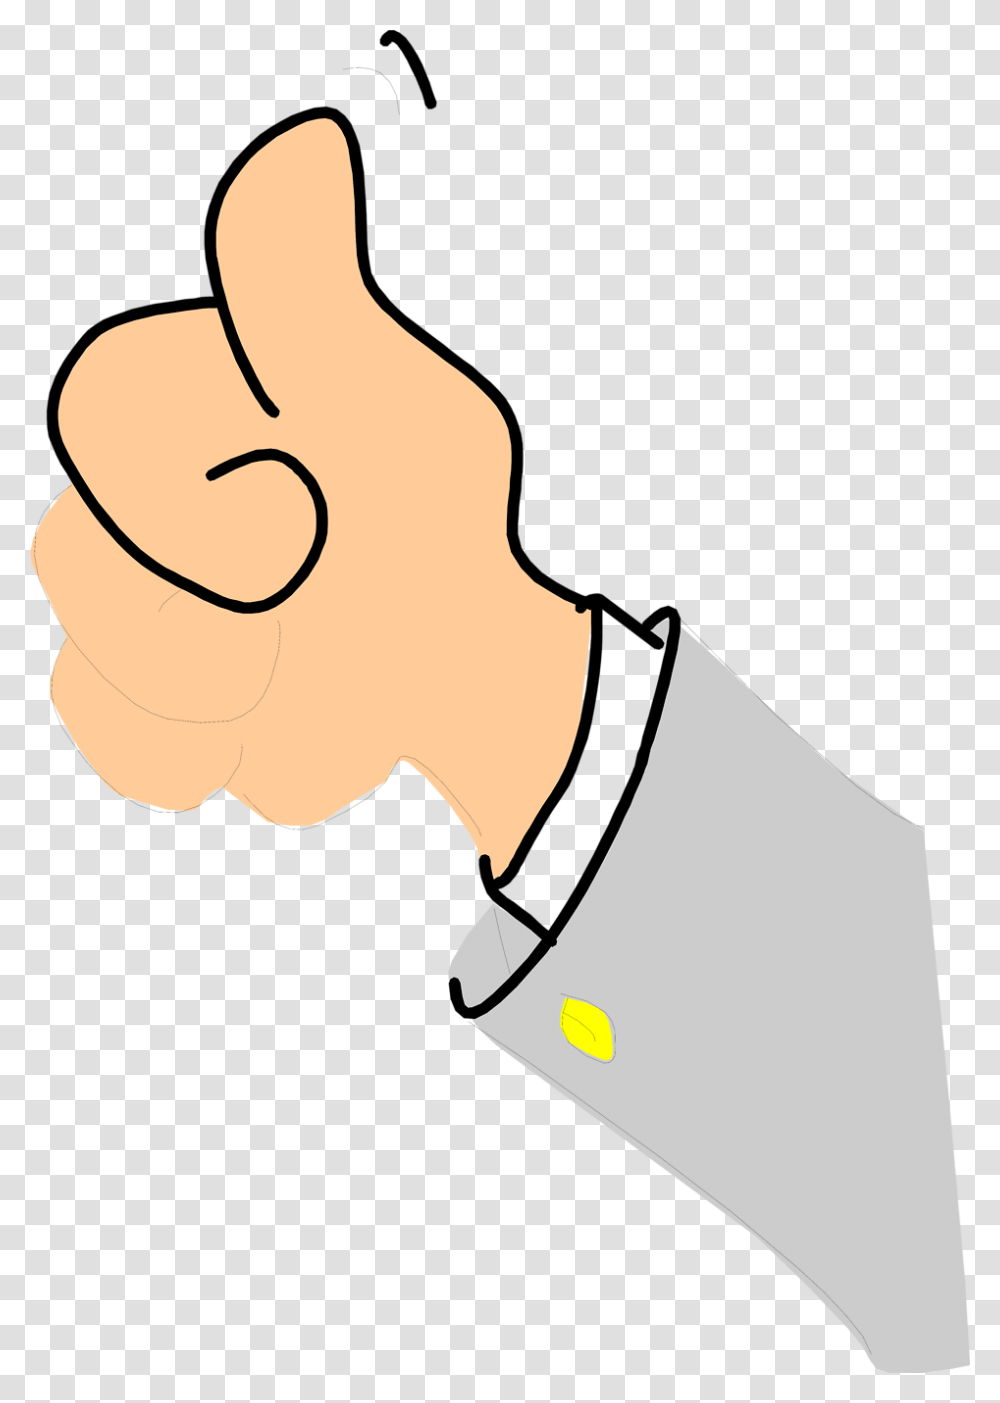 Thumbs Up Free Stock Photo Illustration Of A Cartoon Hand, Finger, Fist Transparent Png